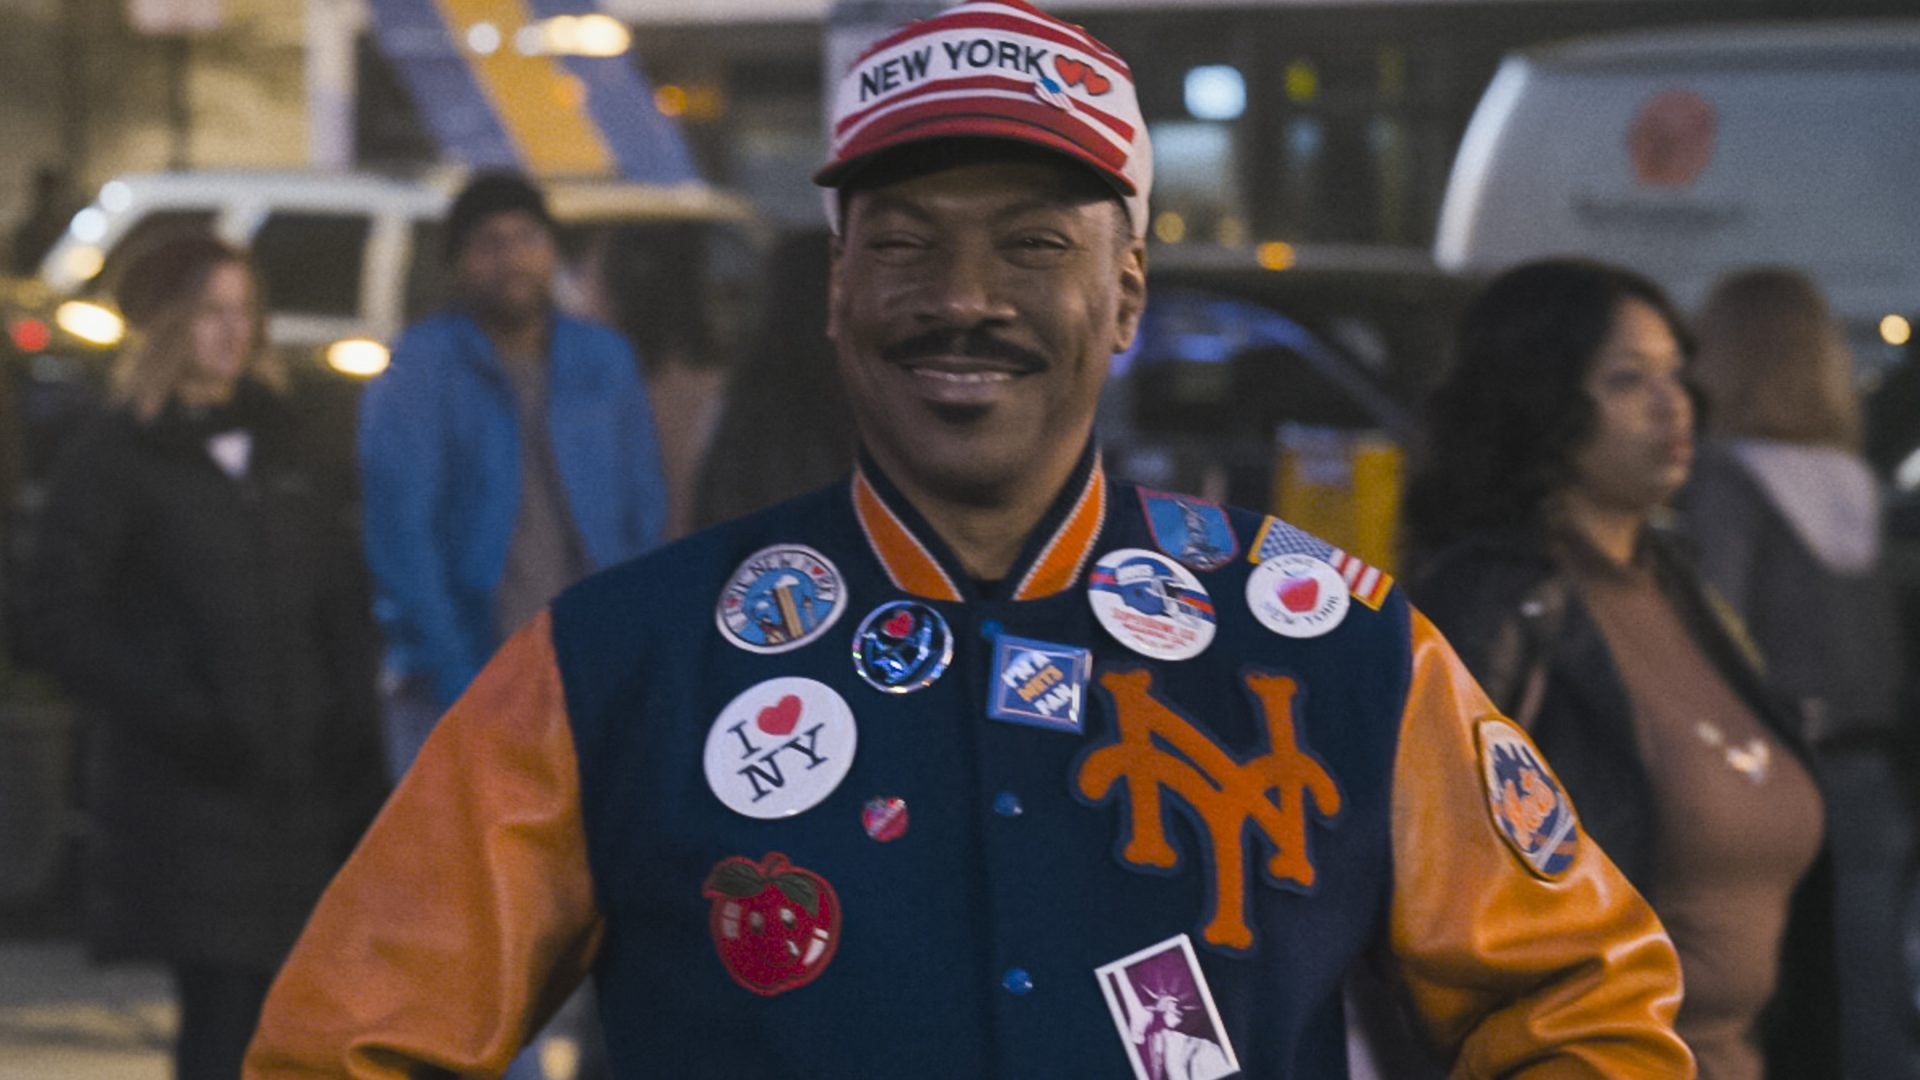 First Look: ‘Coming 2 America’ Photos Featuring Eddie Murphy And Shari Headley